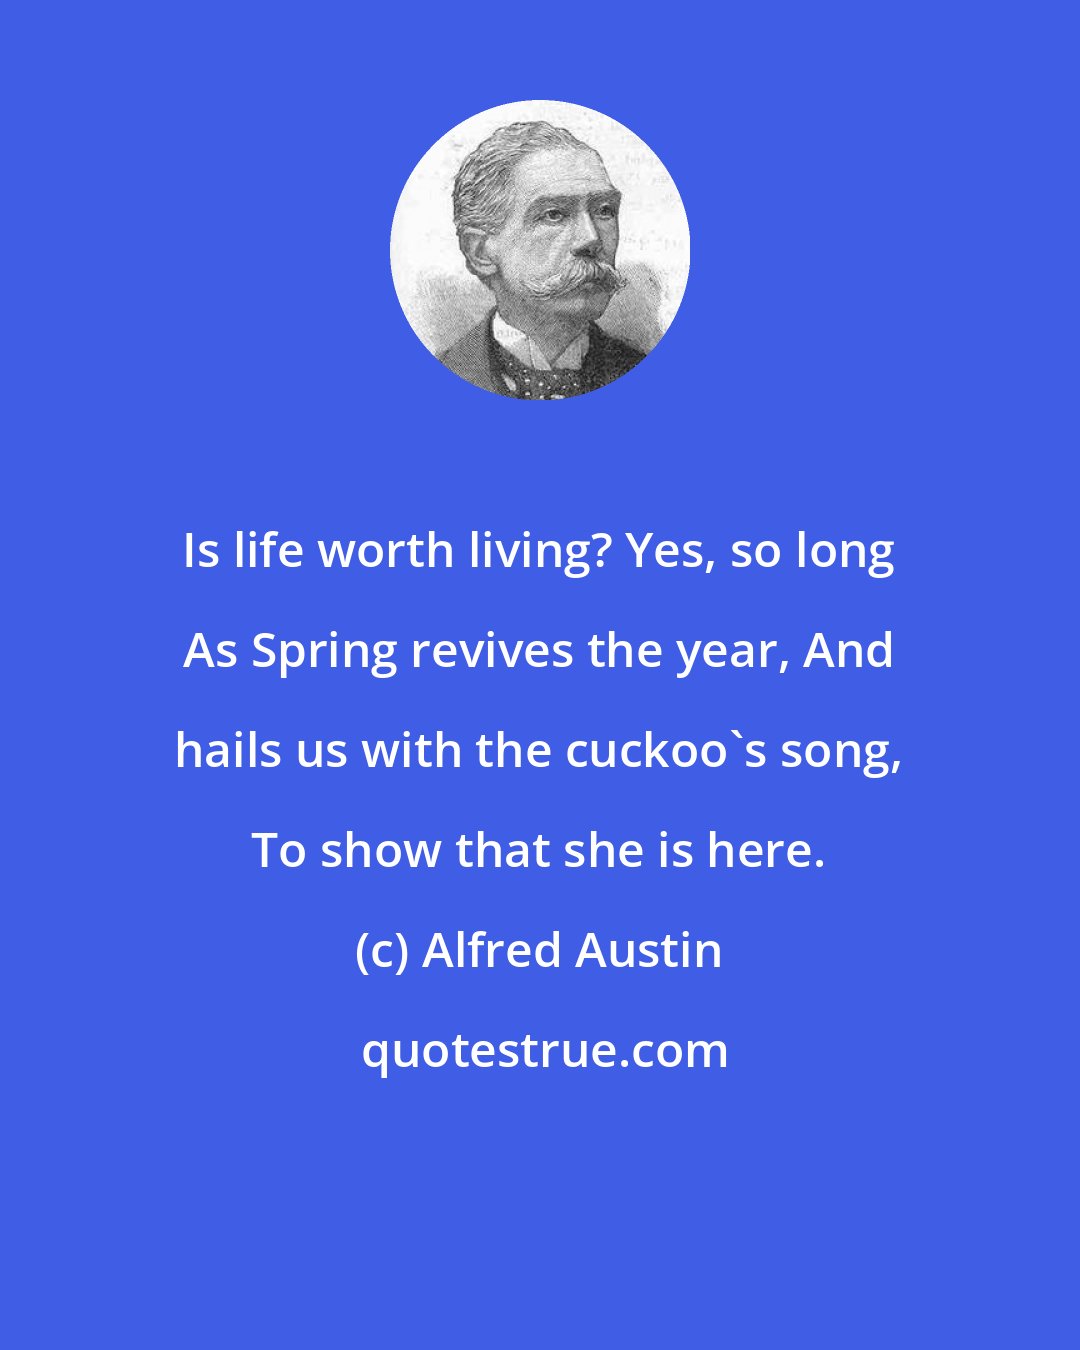 Alfred Austin: Is life worth living? Yes, so long As Spring revives the year, And hails us with the cuckoo's song, To show that she is here.